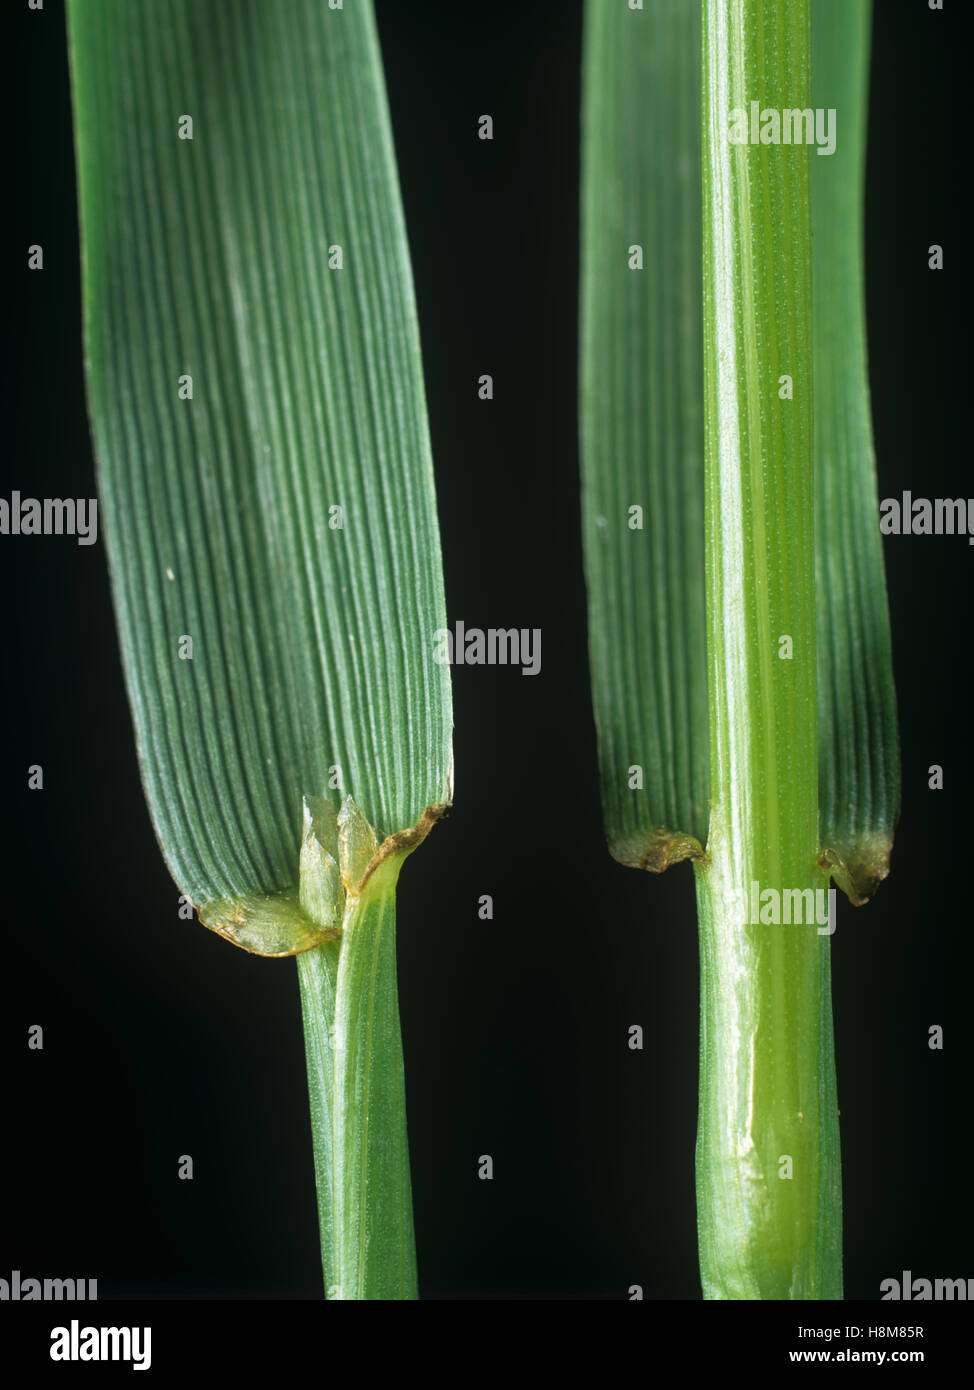 Perennial ryegrass, Lolium perenne, leaf ligule at the node and leafstalk of an agricultural grass Stock Photo